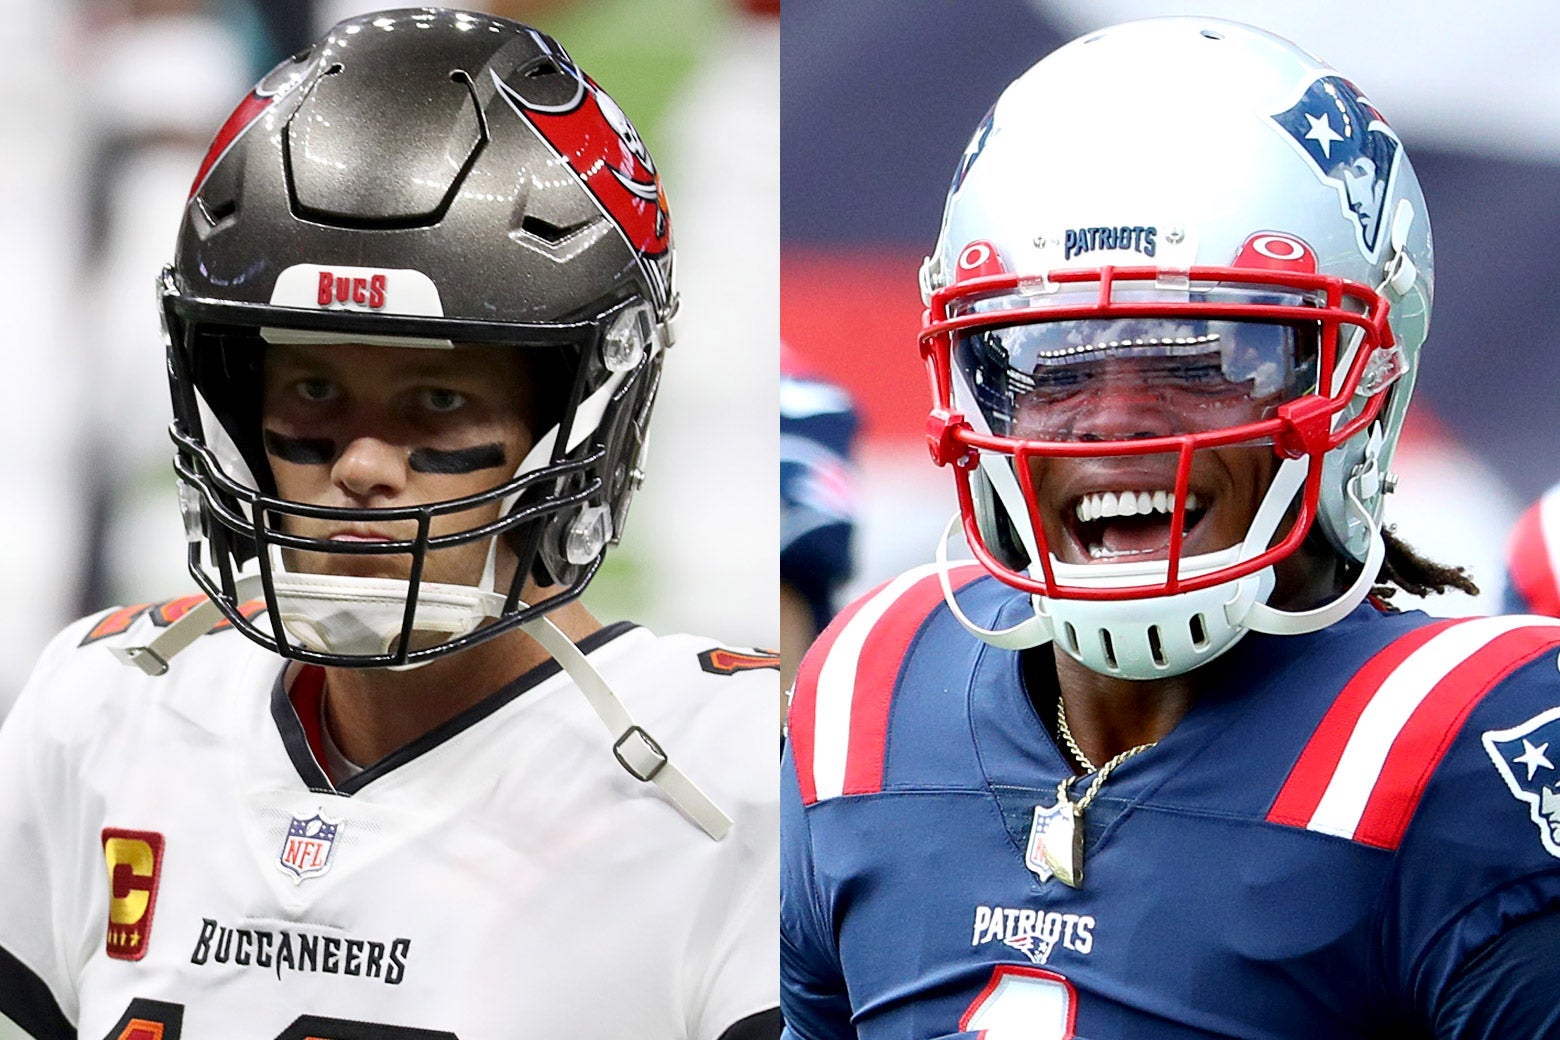 Side-by-side photos of Tom Brady as a Buccaneer and Cam Newton as a Patriot.